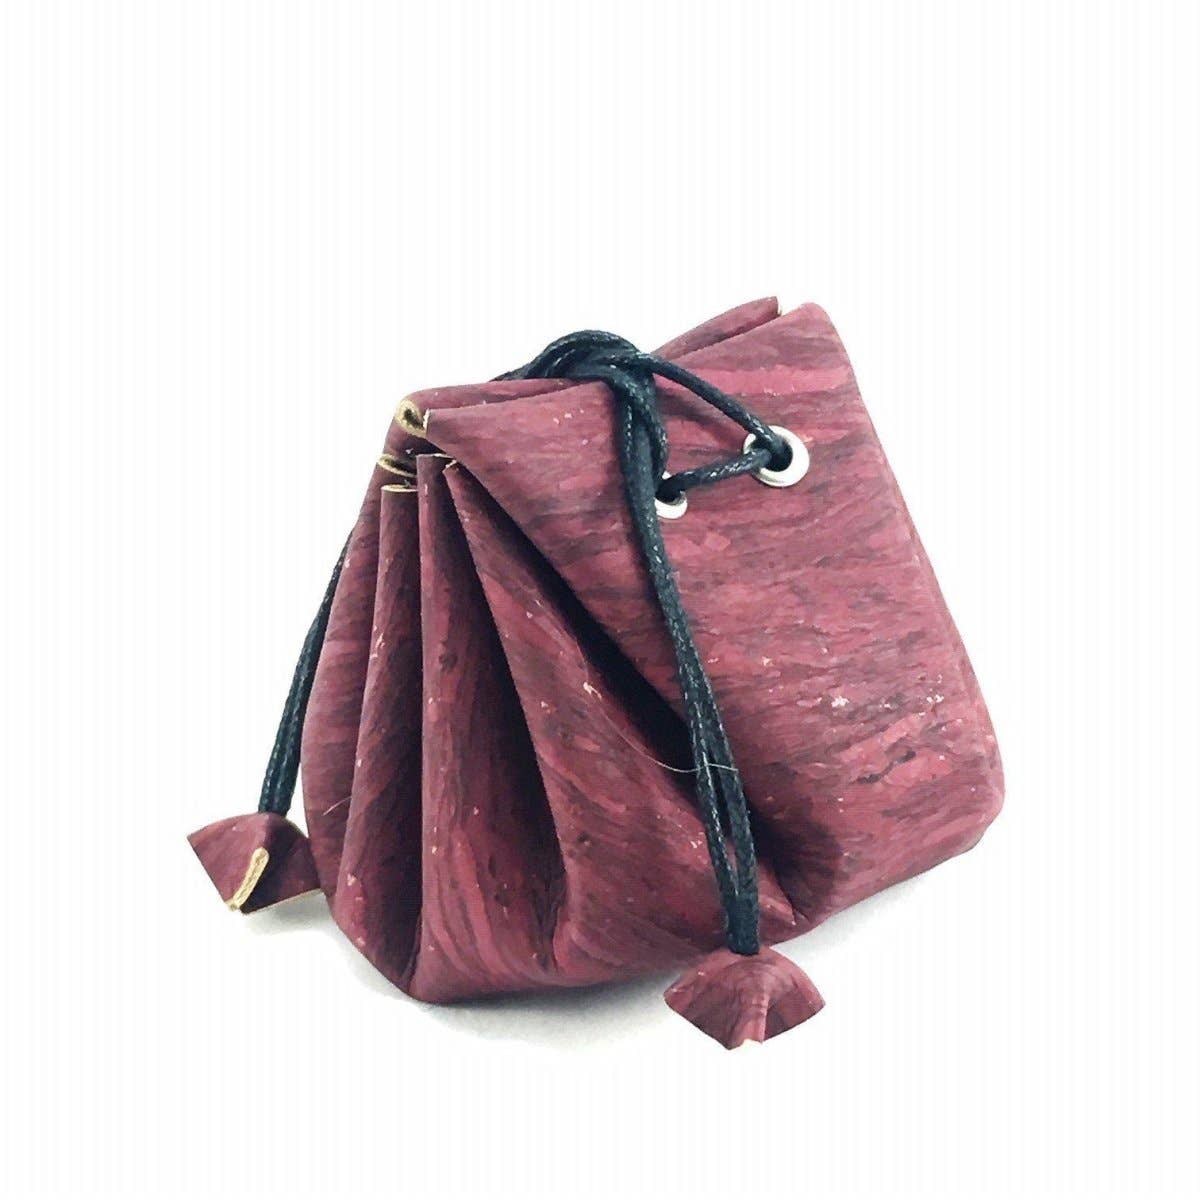 Cork Coin Purse and Vegan Drawstring Pouch for Coins in Burgundy